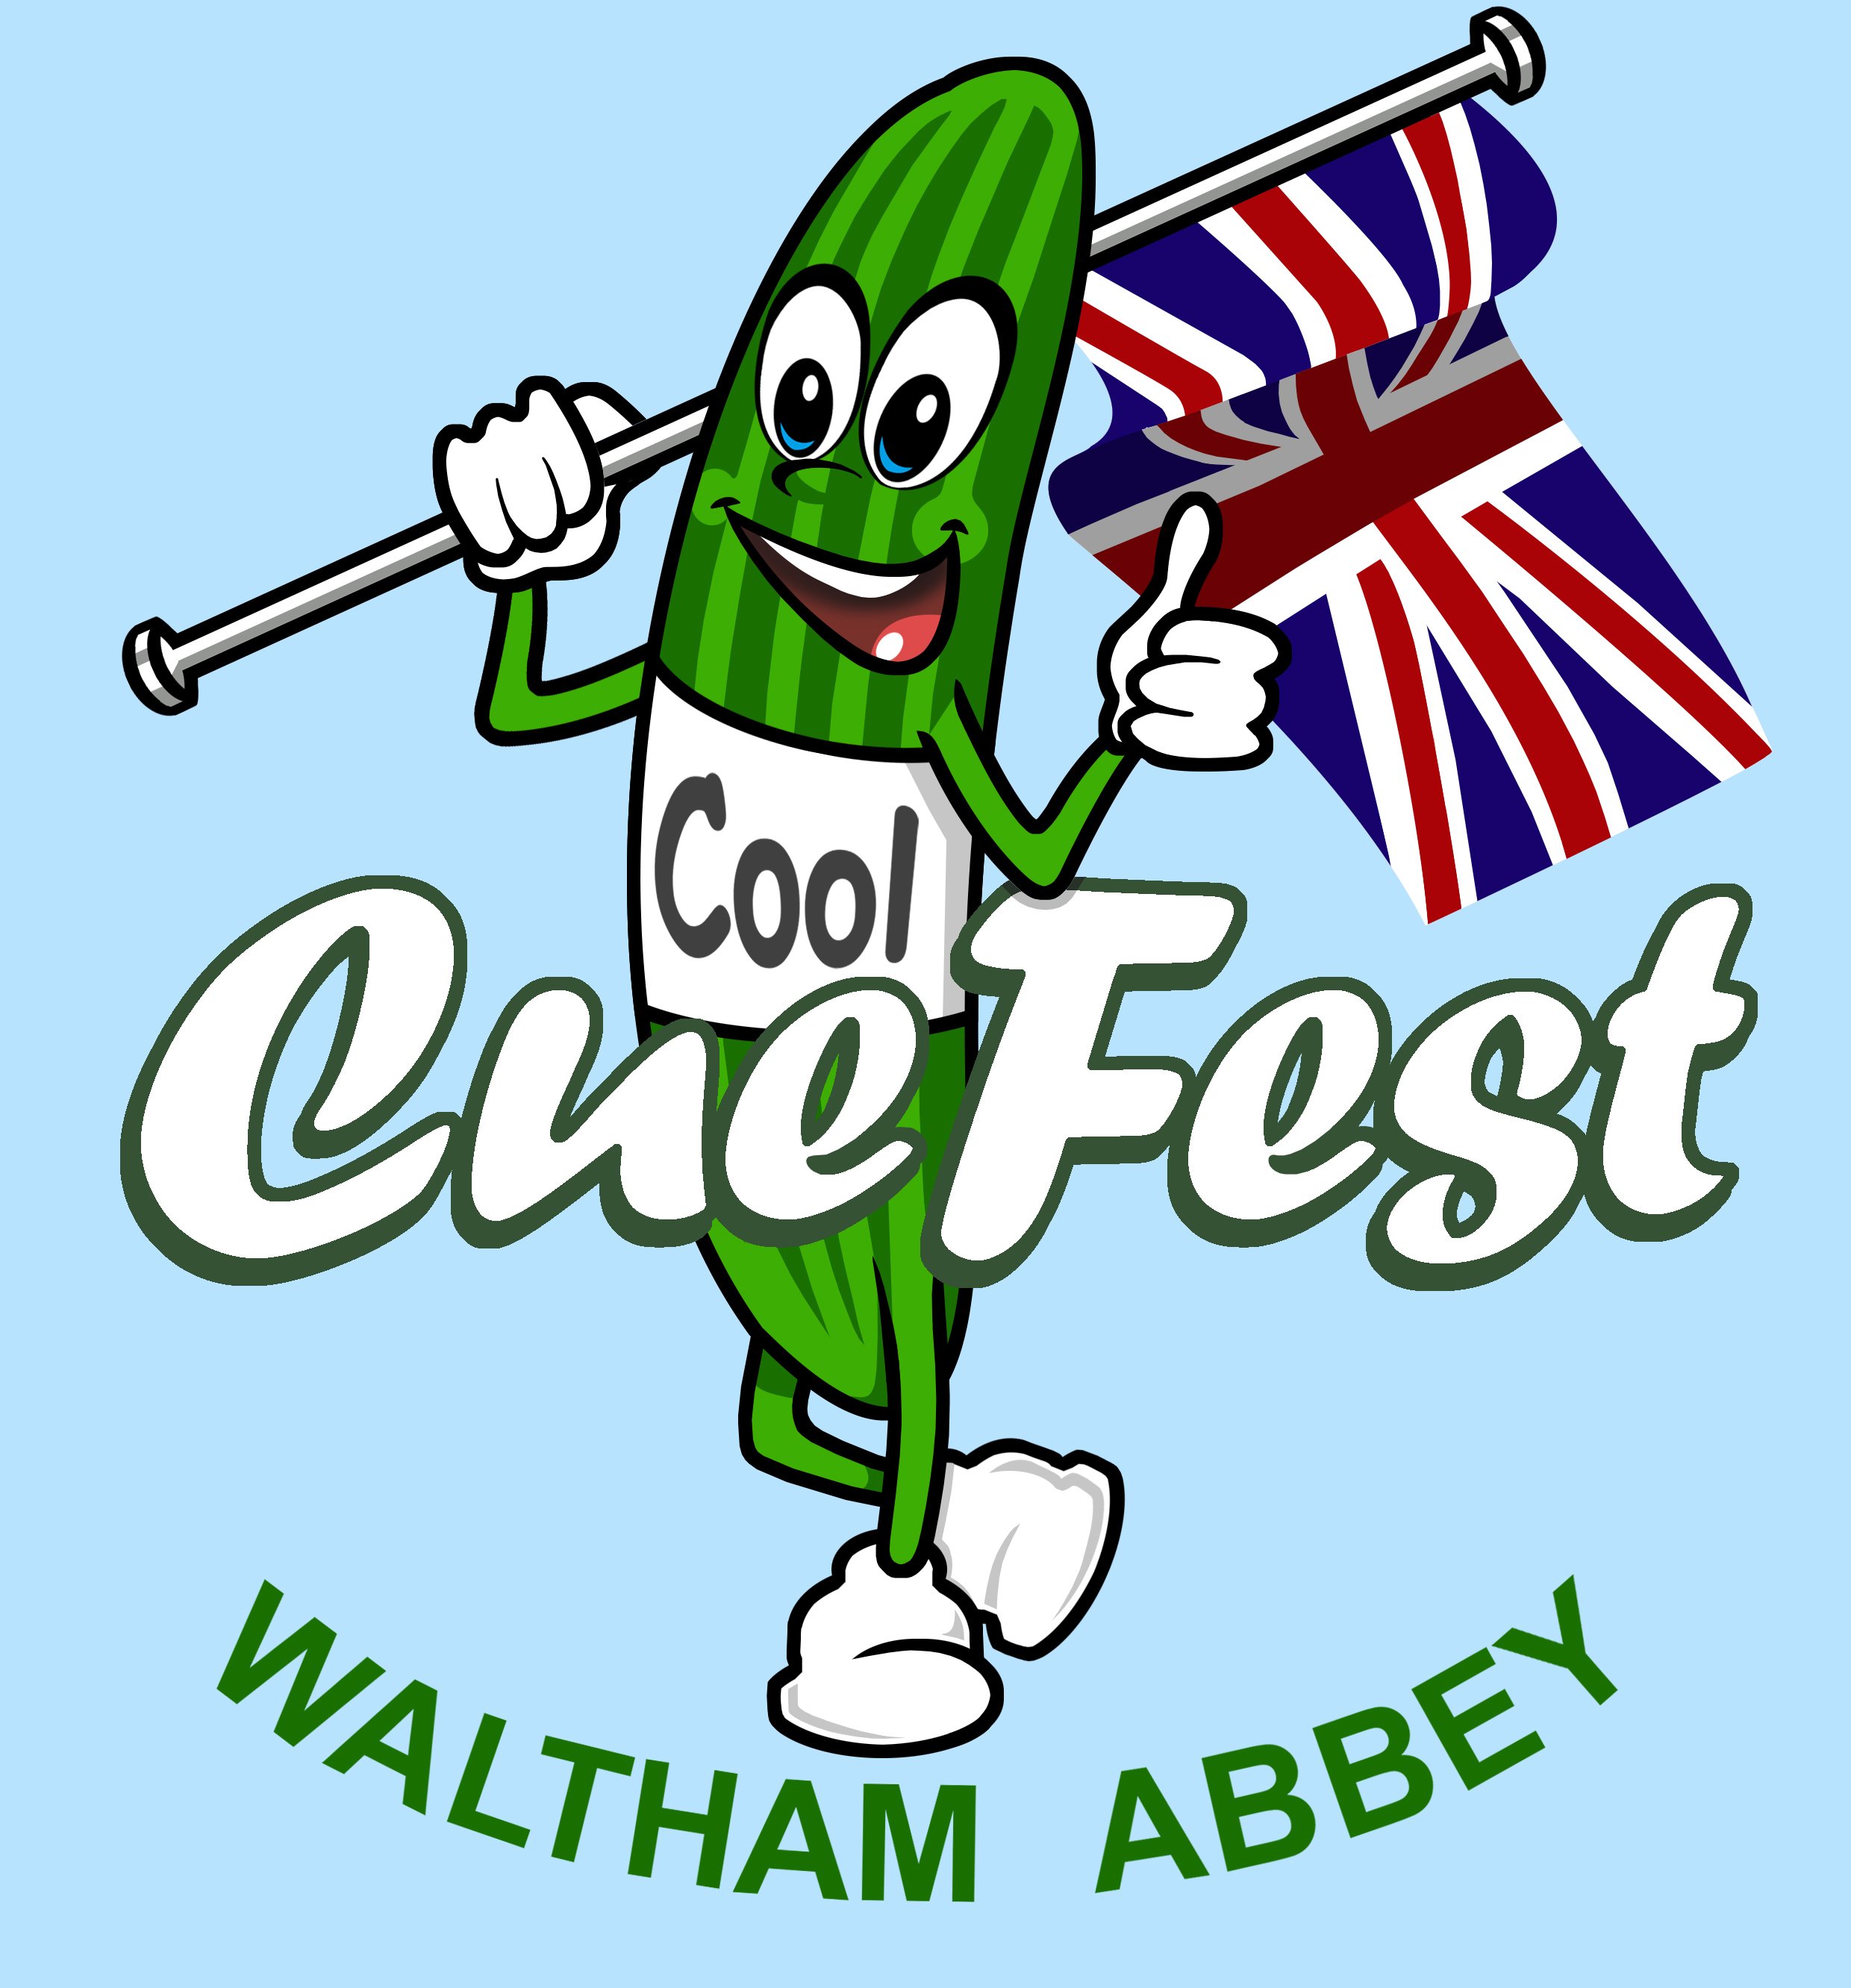 Bank Hol Sun 5th & Mon 6th May 19
Waltham Abbey hosts a major event showcasing food, drink  & entertainment in the district. A family fun day out.